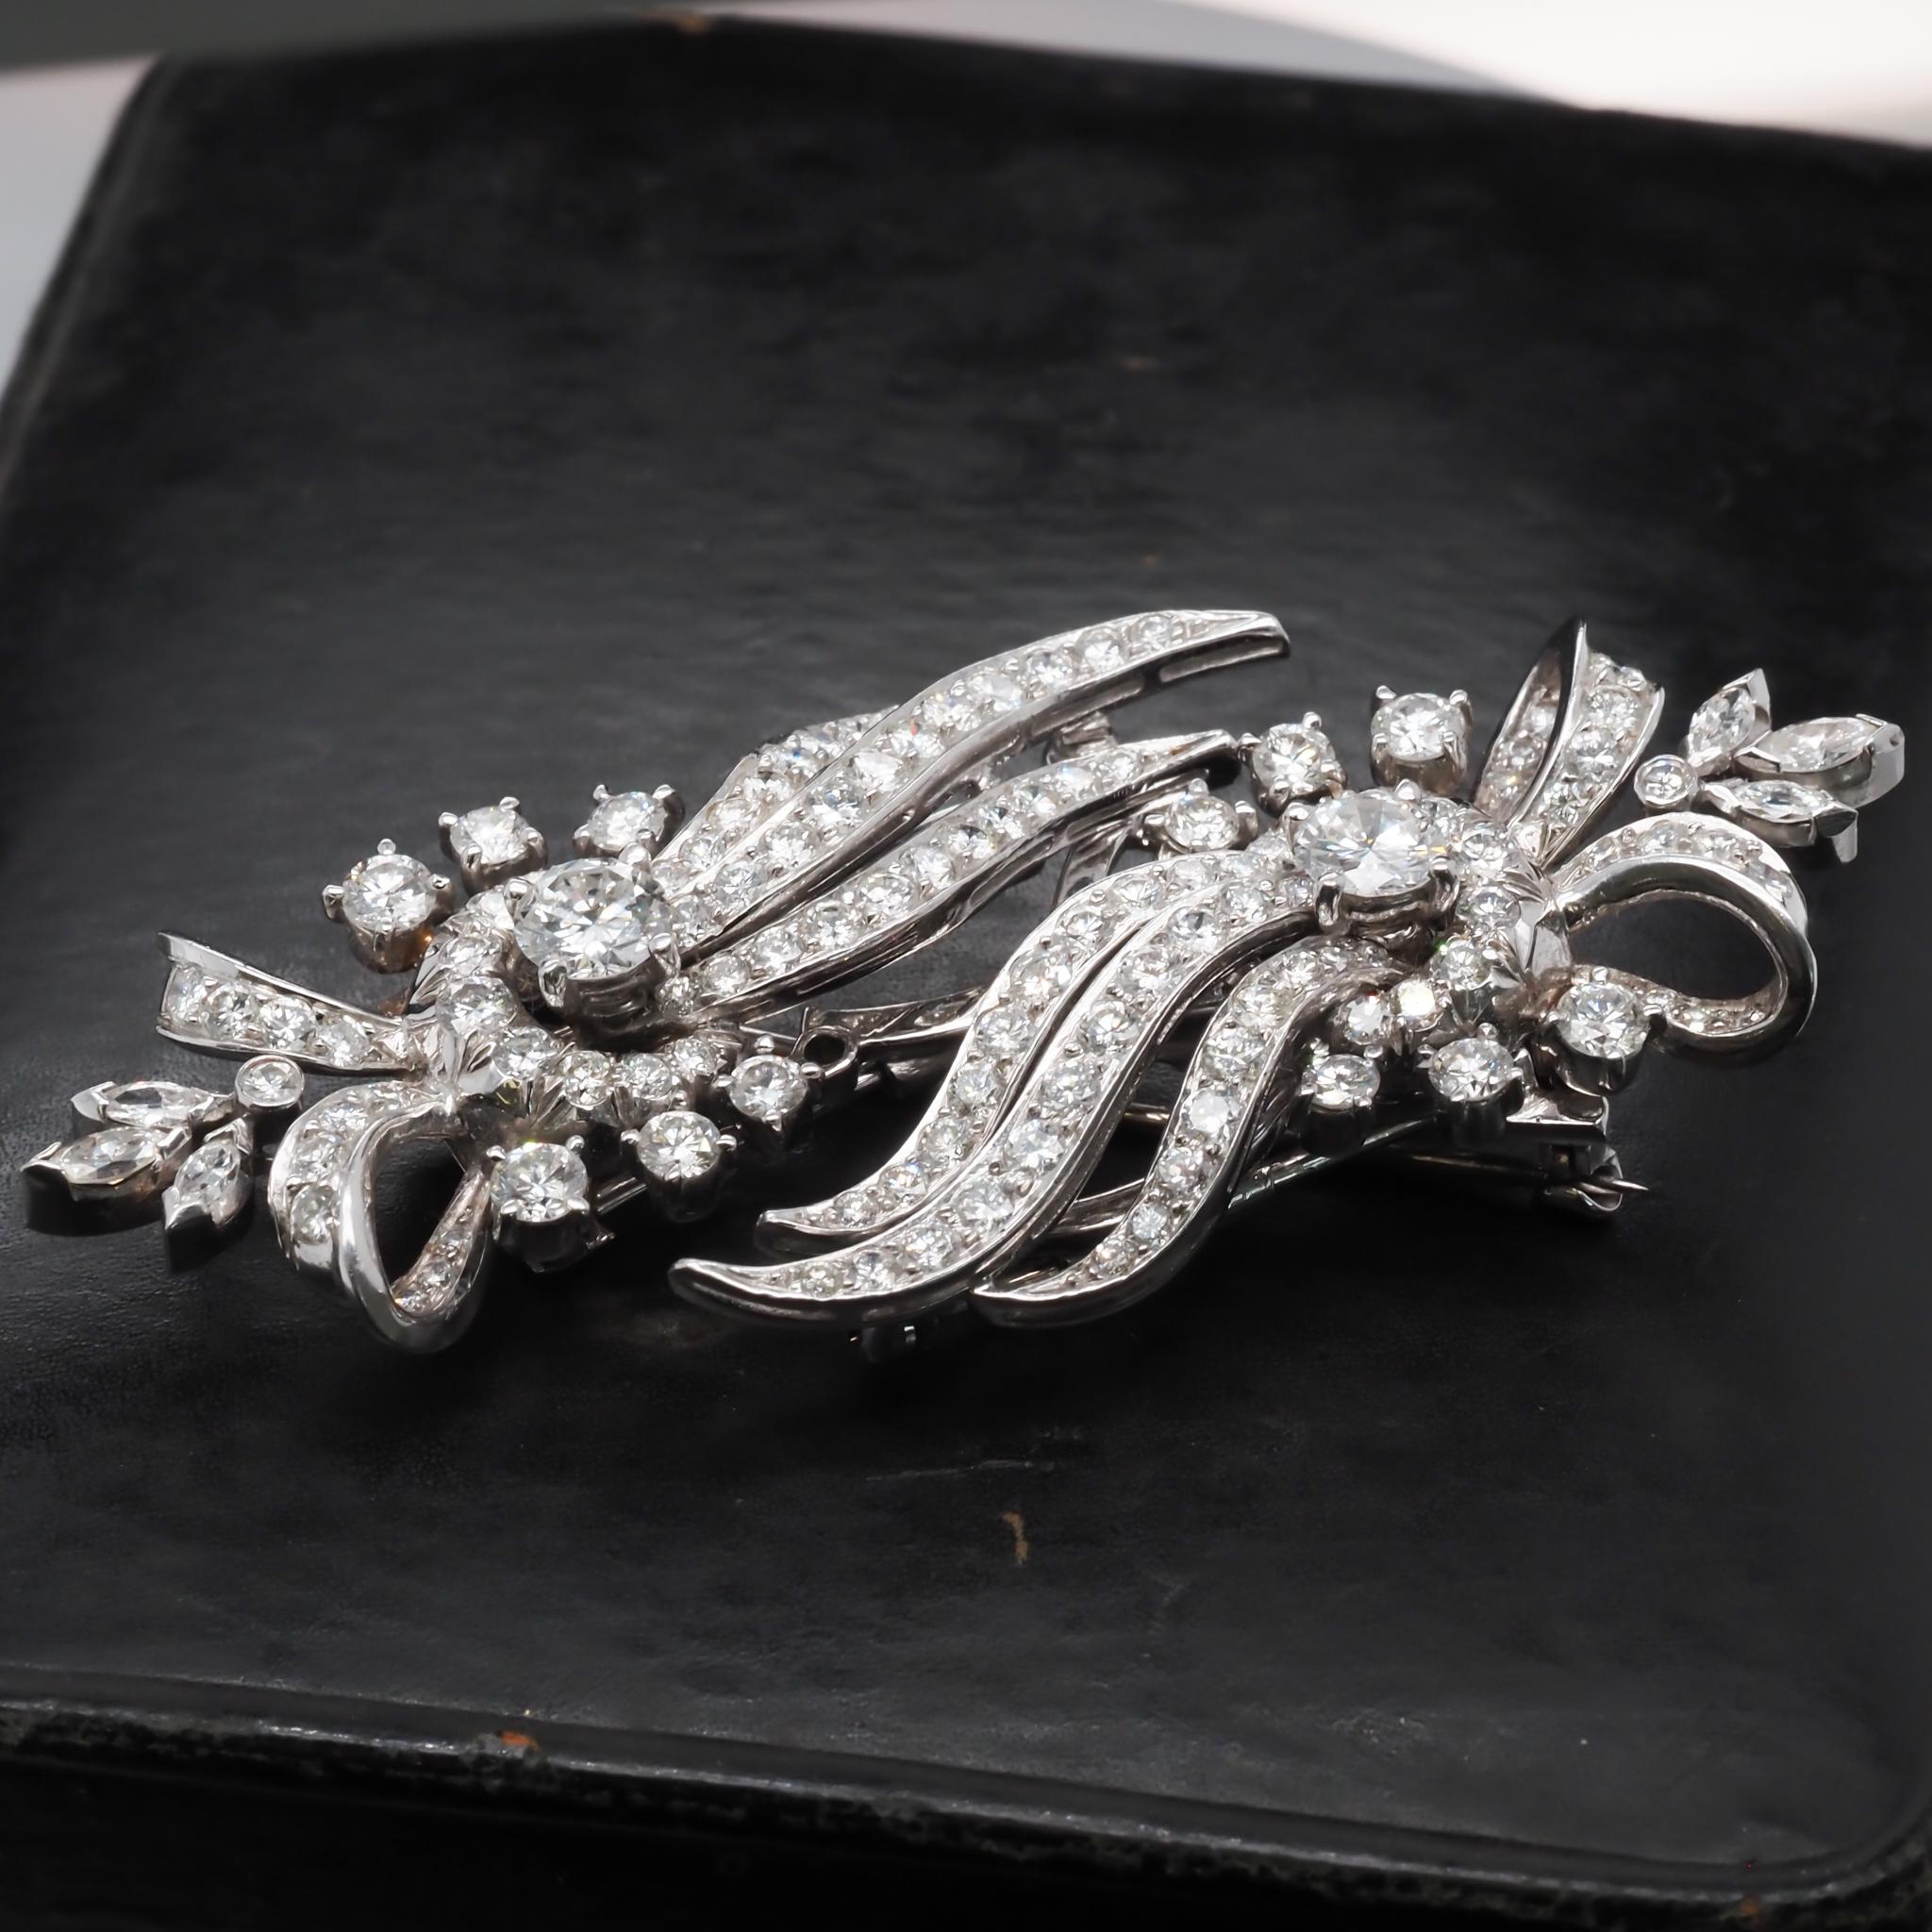 Metal Type: Platinum (Pin is 14K White Gold) [Hallmarked, and Tested]
Weight: 27.3 grams
*Clips detach to be worn separately or you can wear as 1 large brooch.
Center Diamond Details:
Weight: 1.20ct (2 Diamonds, .60ct each)
Cut: Round